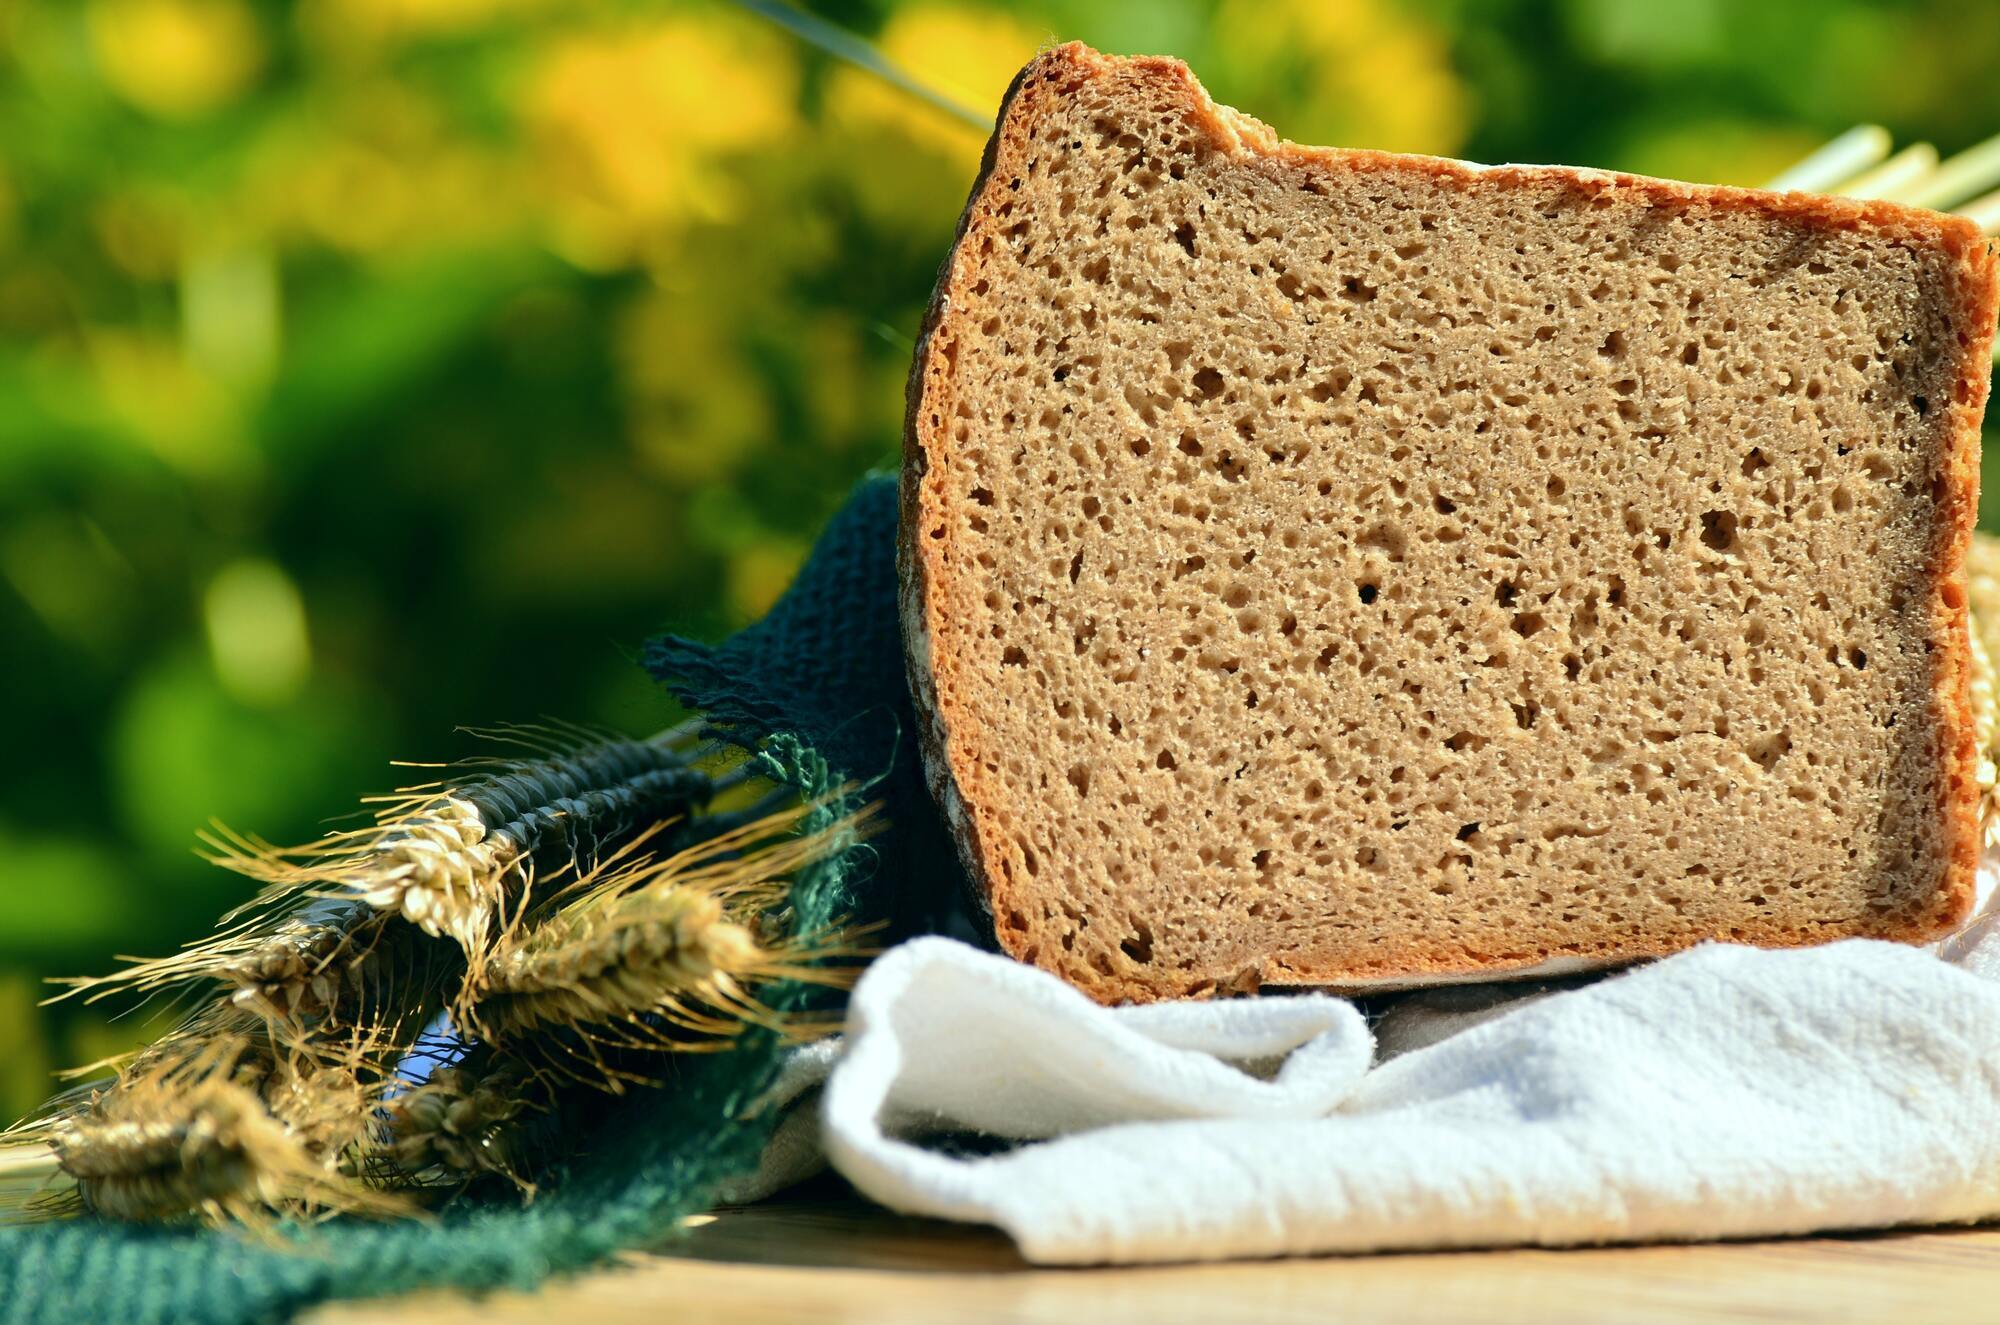 There is no need to give up bread, pasta and cereals: the doctor dispelled the myth about the harm of gluten